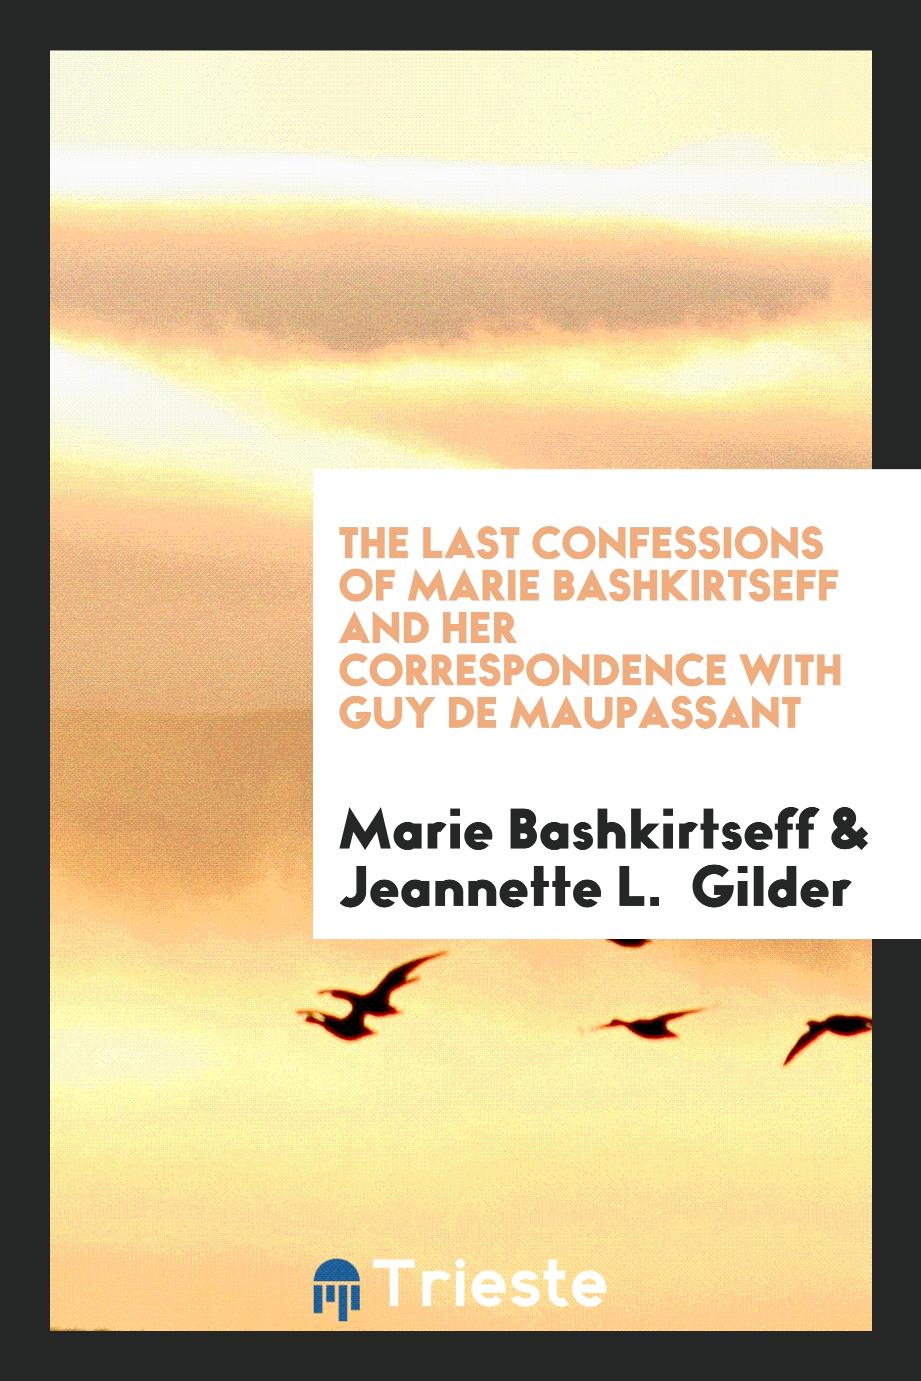 The Last Confessions of Marie Bashkirtseff and Her Correspondence with Guy de Maupassant